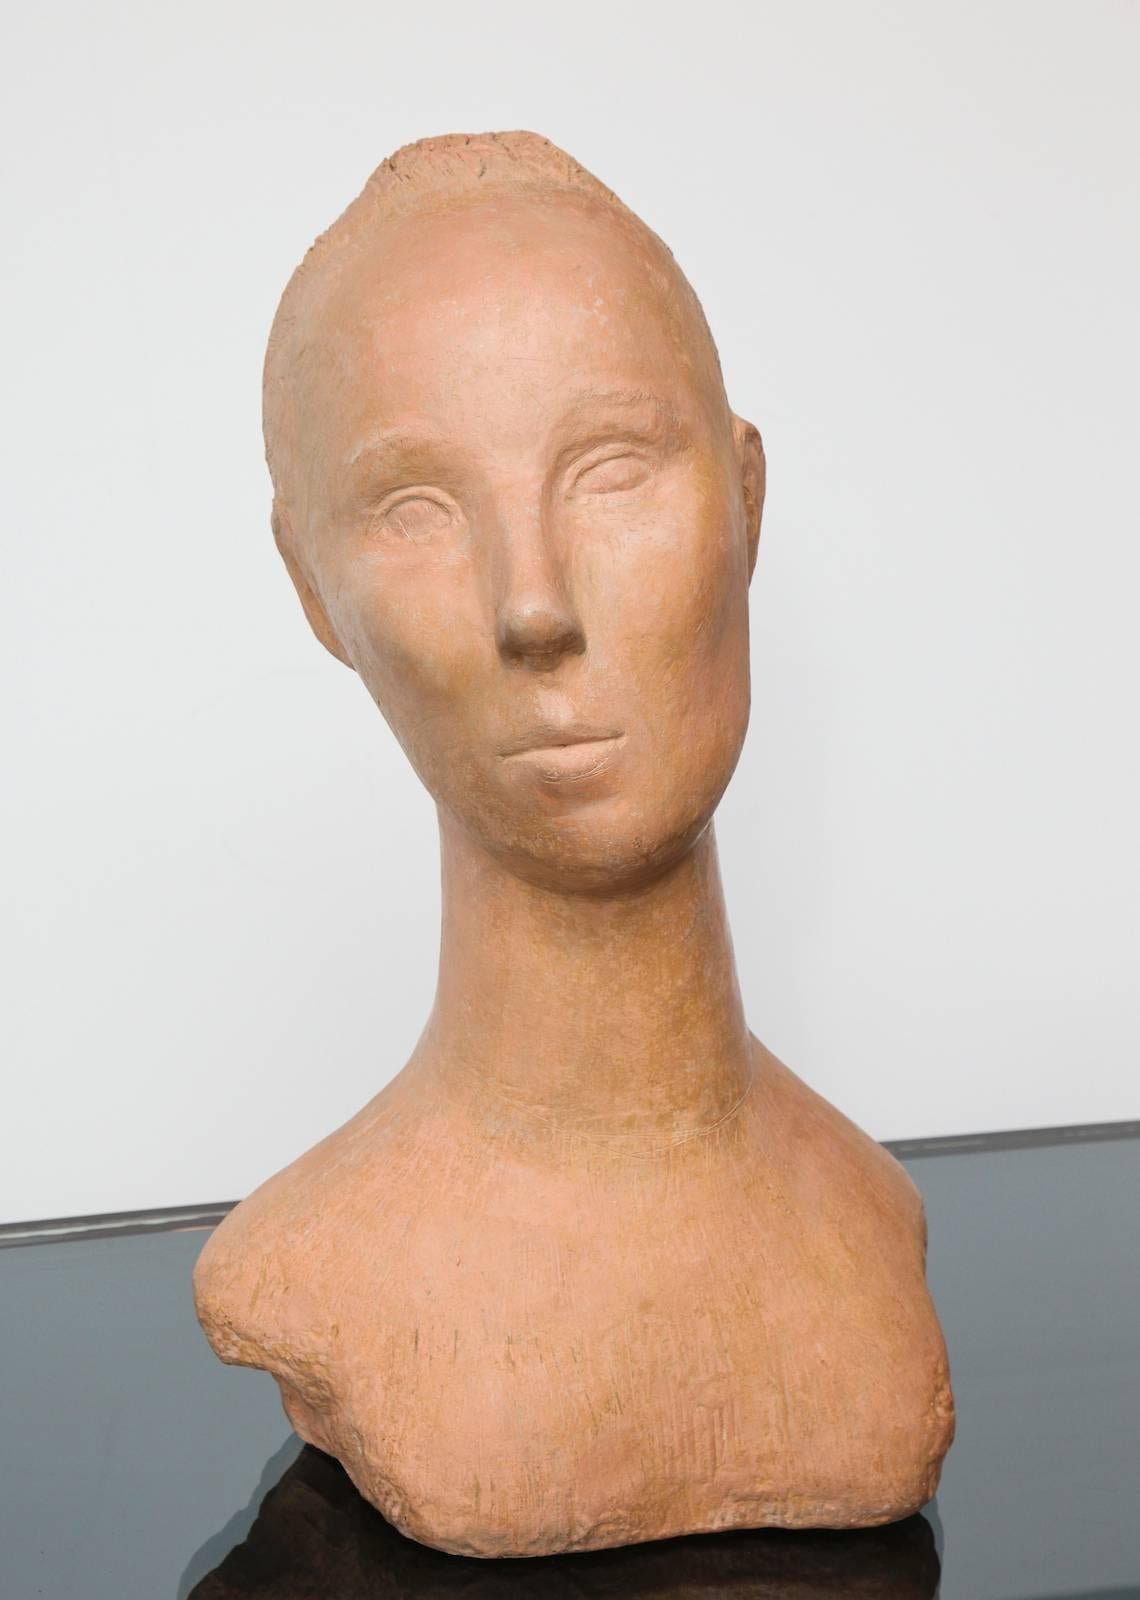 Hand-built terra cotta bust. Signed on lower rear. 
Published: “American Art Today, Gallery of American Art Today, New York World’s Fair.” Whalen & Goodyear, pg 201.
*This sculpture was exhibited in the New York, 1939 World’s Fair.